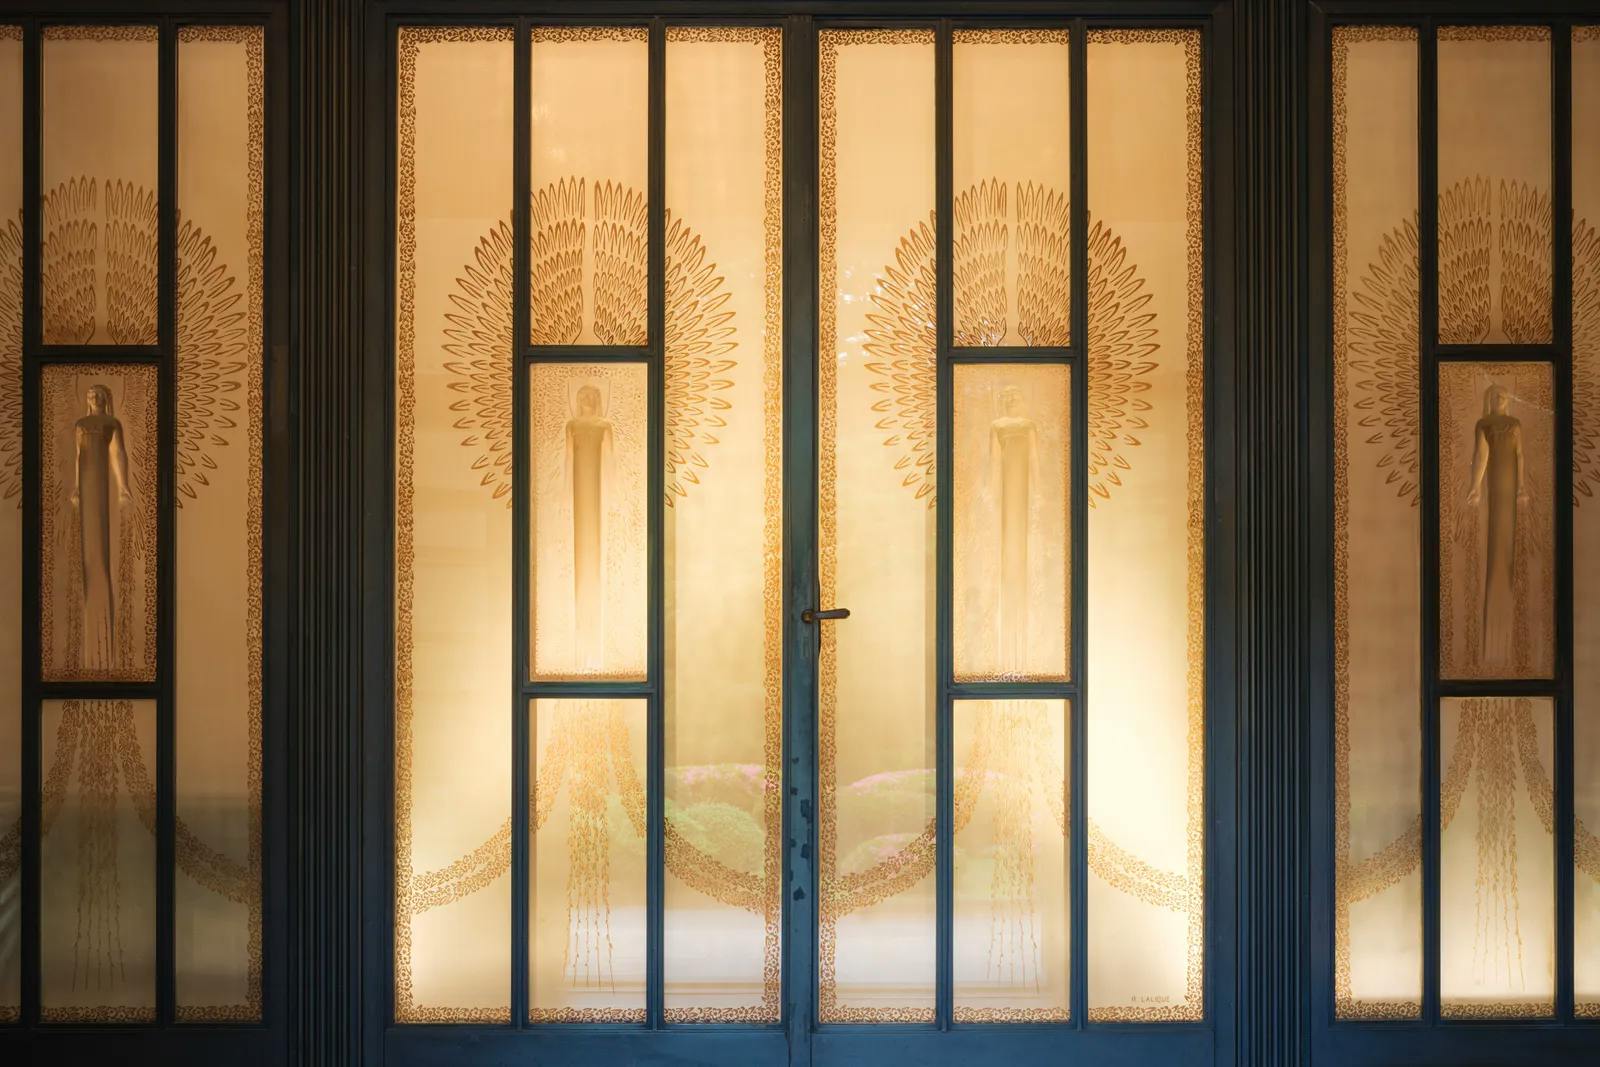 Doors by Lalique in the entrance hall of the former Asaka Palace Main Building | Photo credit: Ookura Hideki